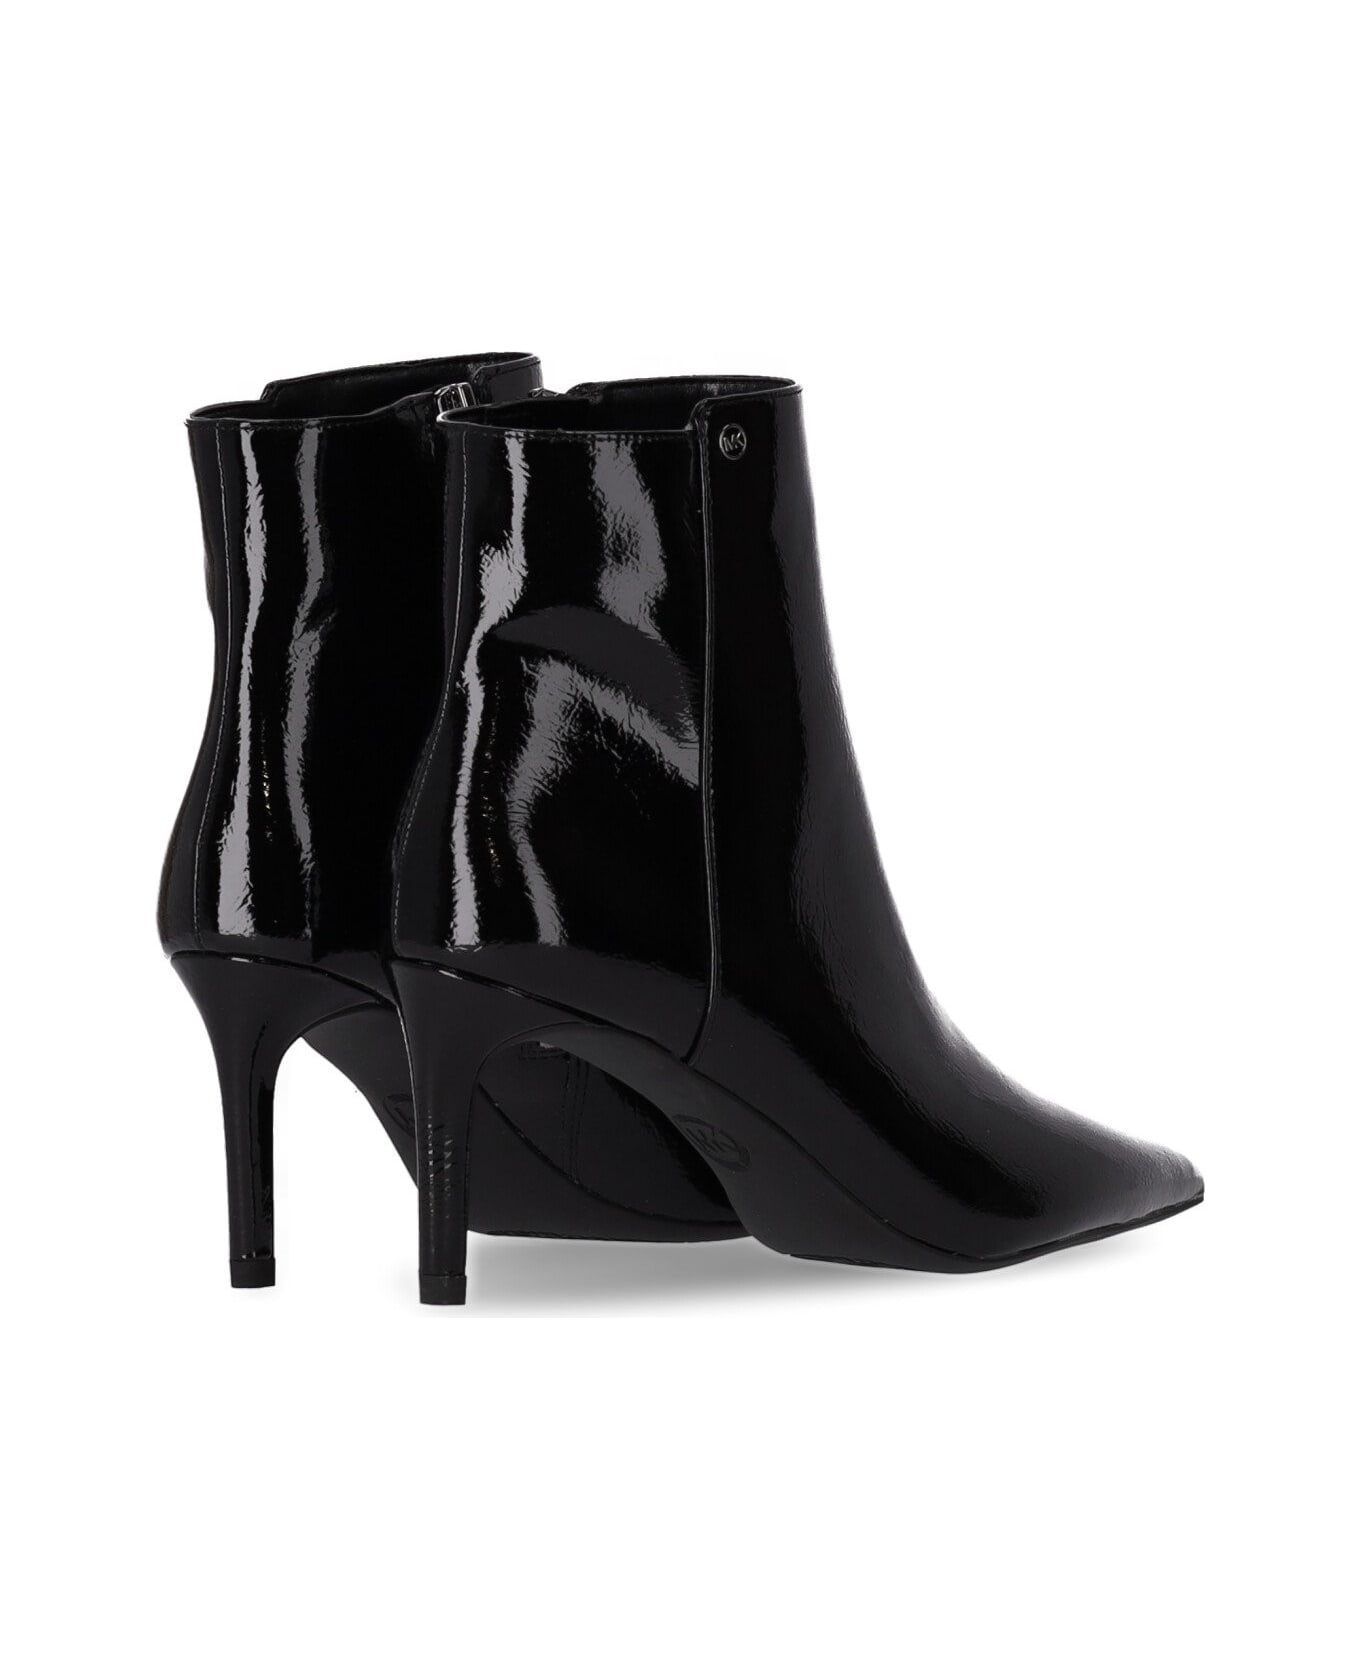 Michael Kors Polished Pointed Toe Ankle Boots - Nero ブーツ